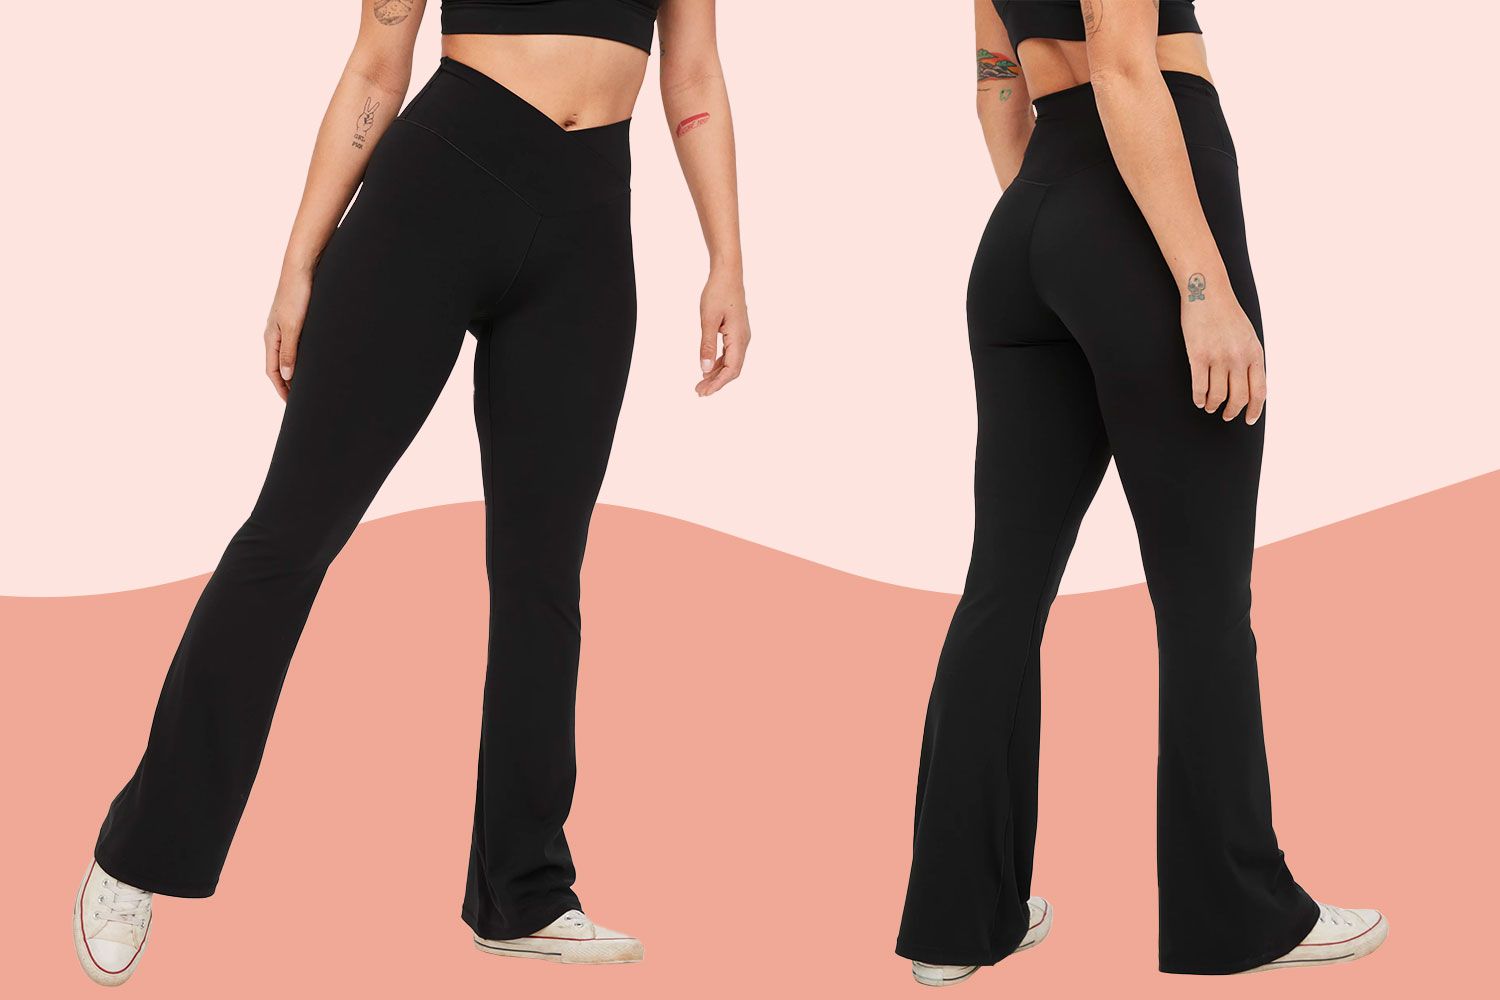 Why crossover leggings are a must-have for any woman's wardrobe?